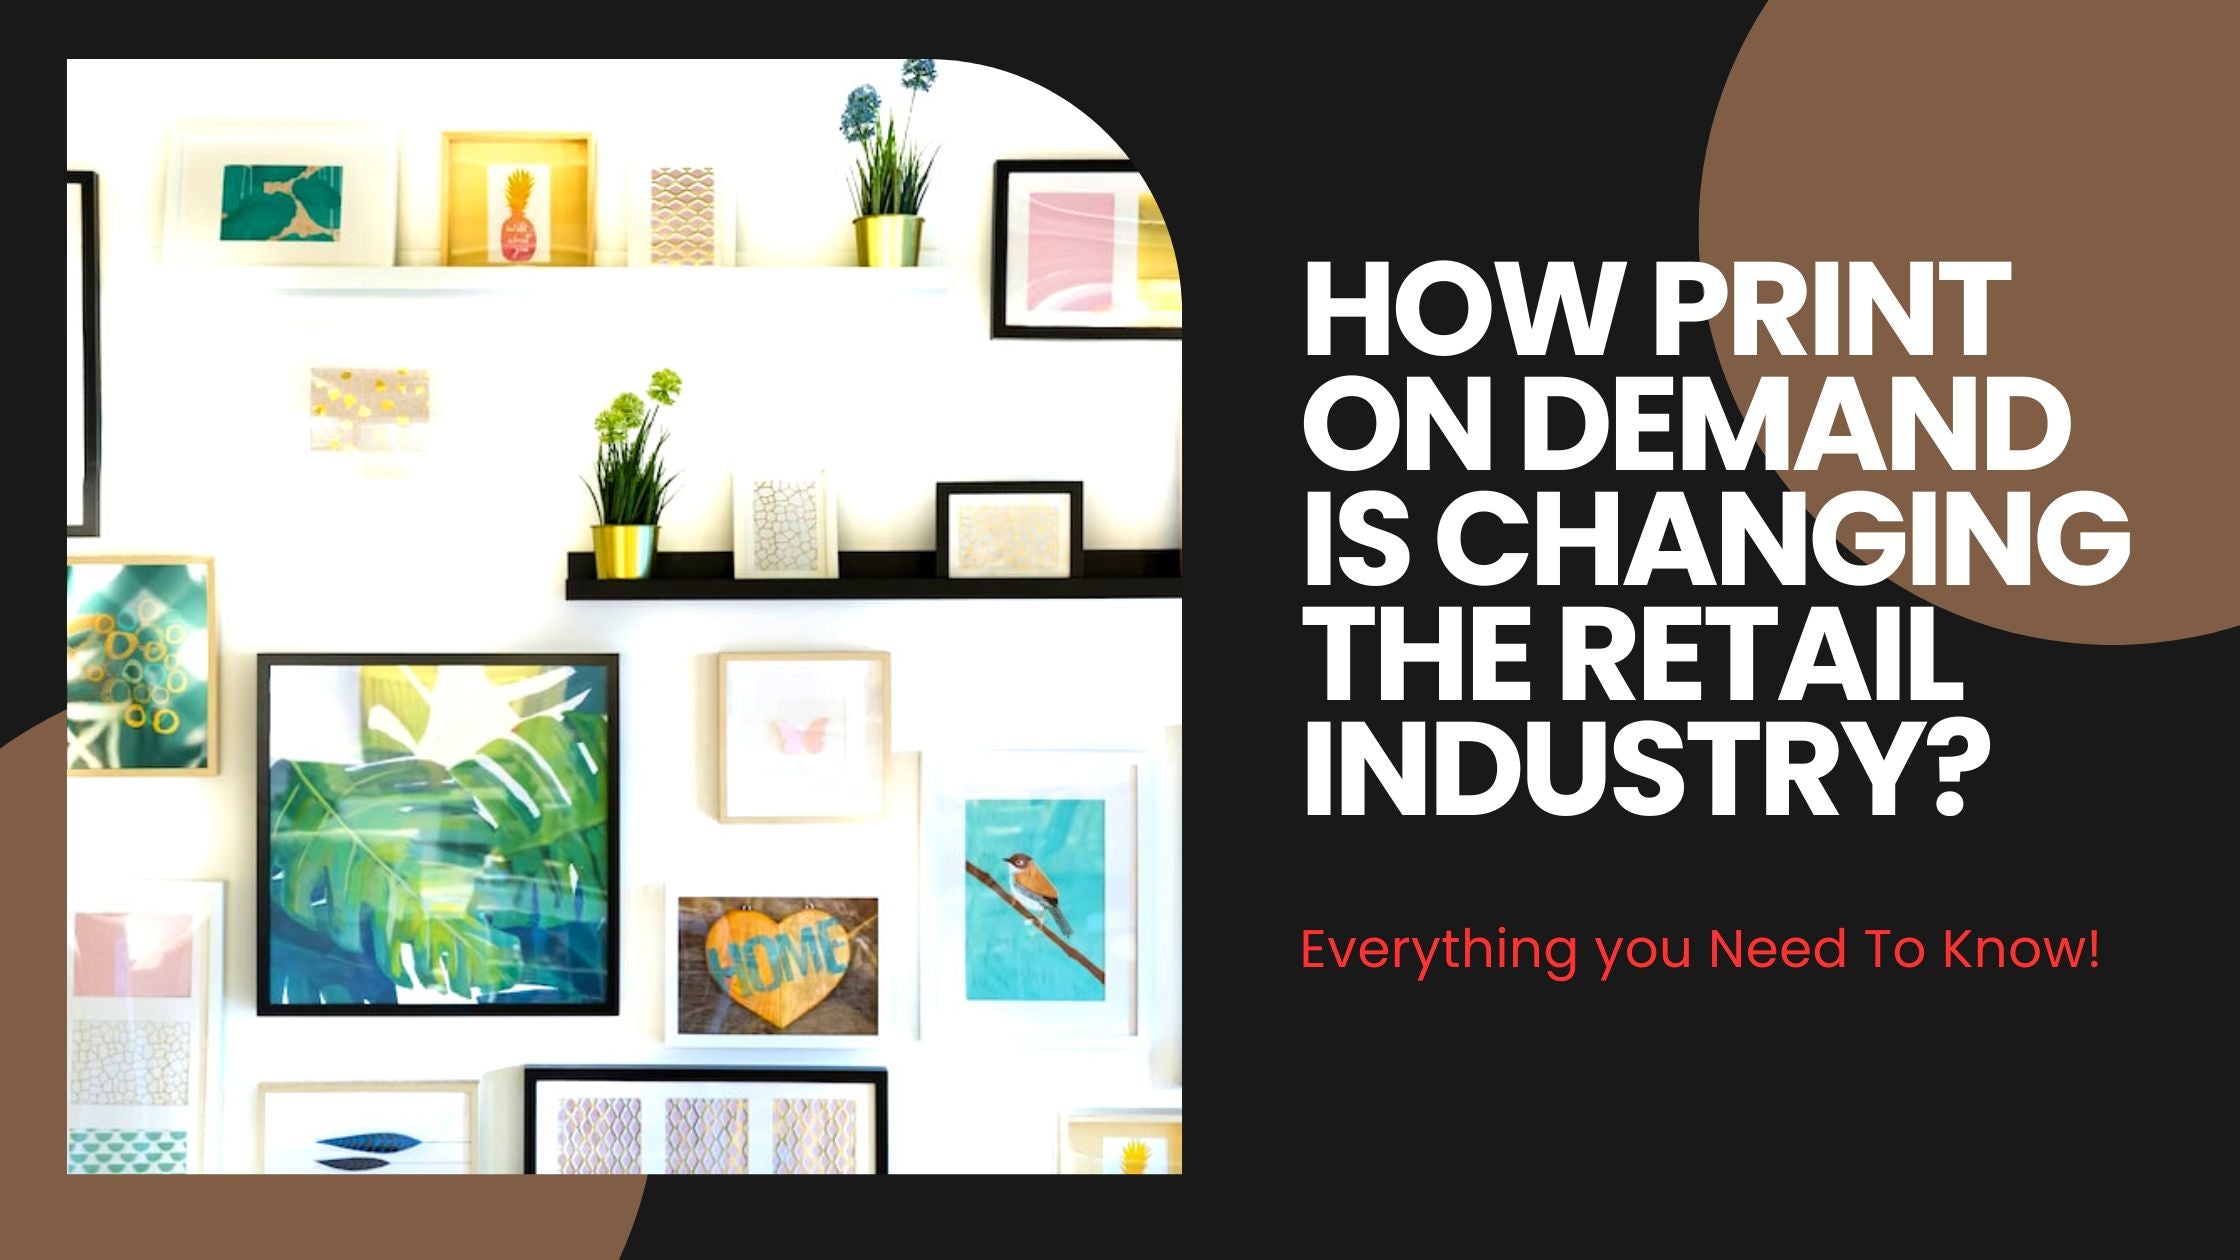 How Print on Demand is Changing the Retail Industry